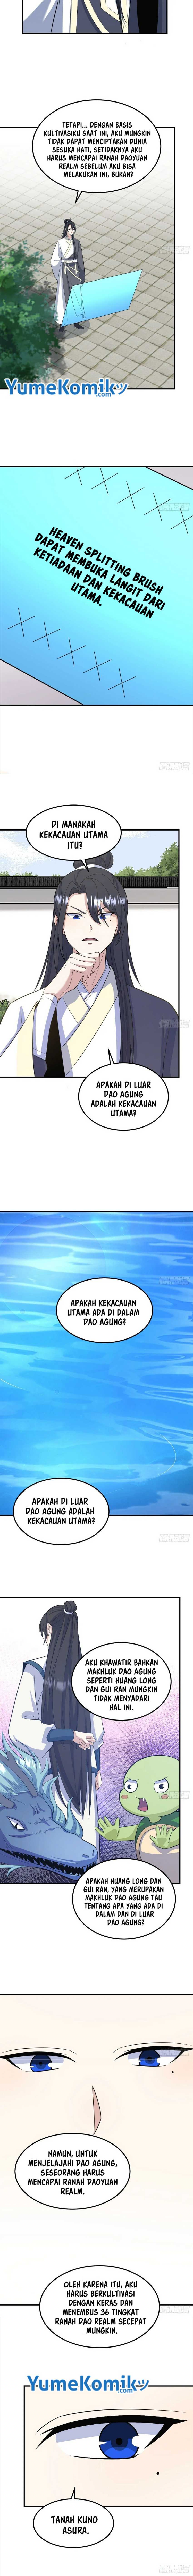 Invincible After a Hundred Years of Seclusion Chapter 195 bahasa indonesia